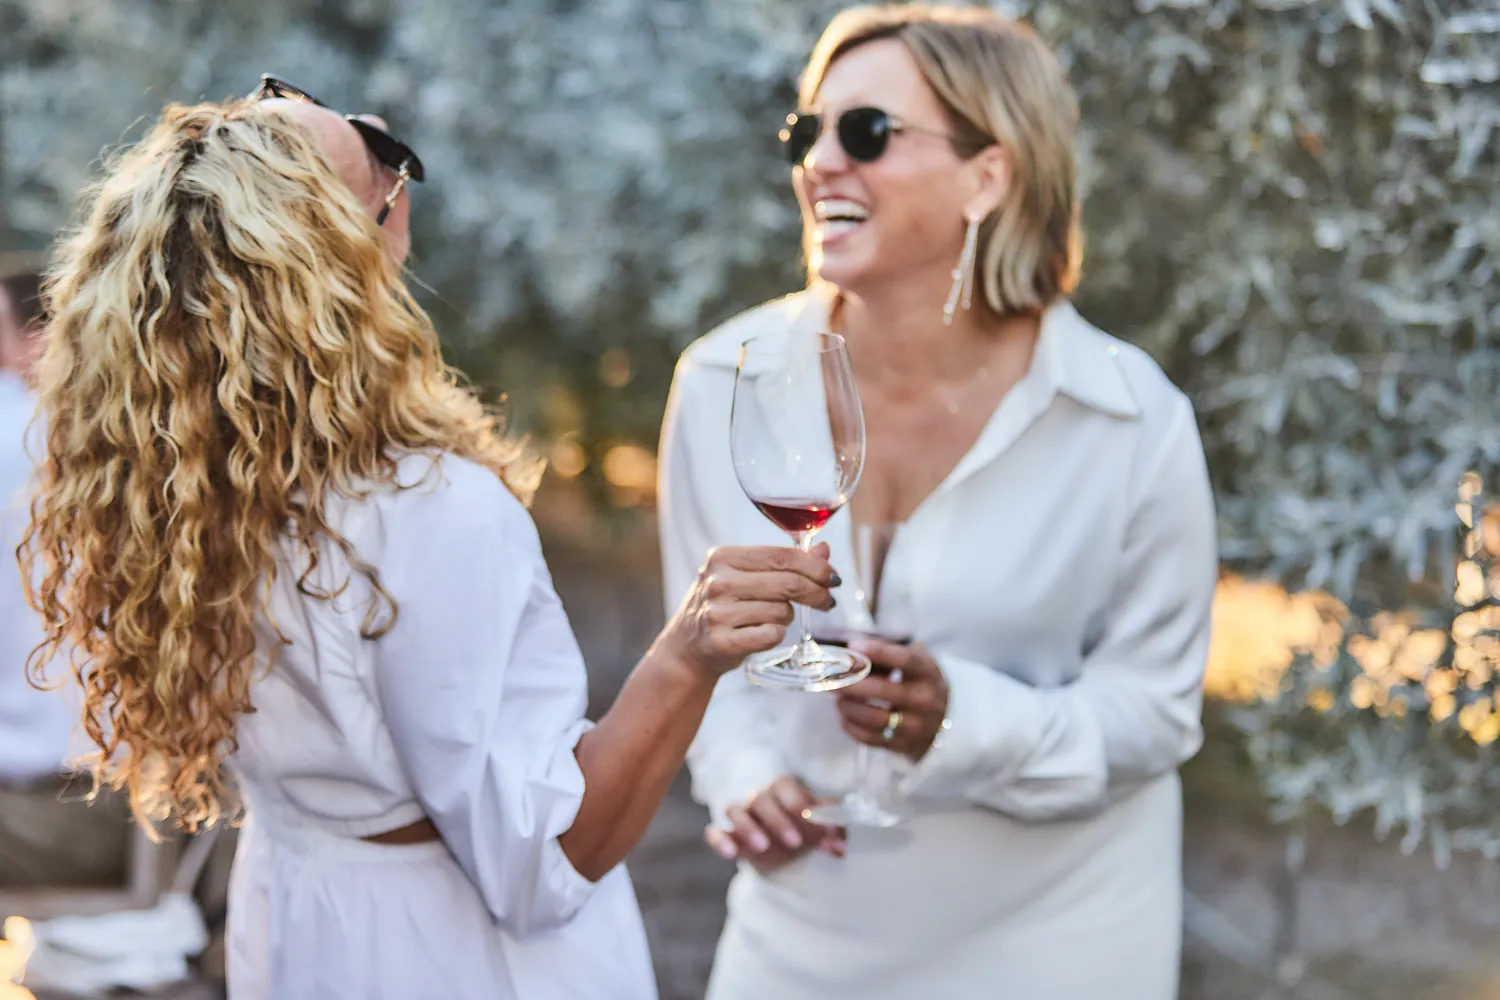 image of people smiling with wine glasses